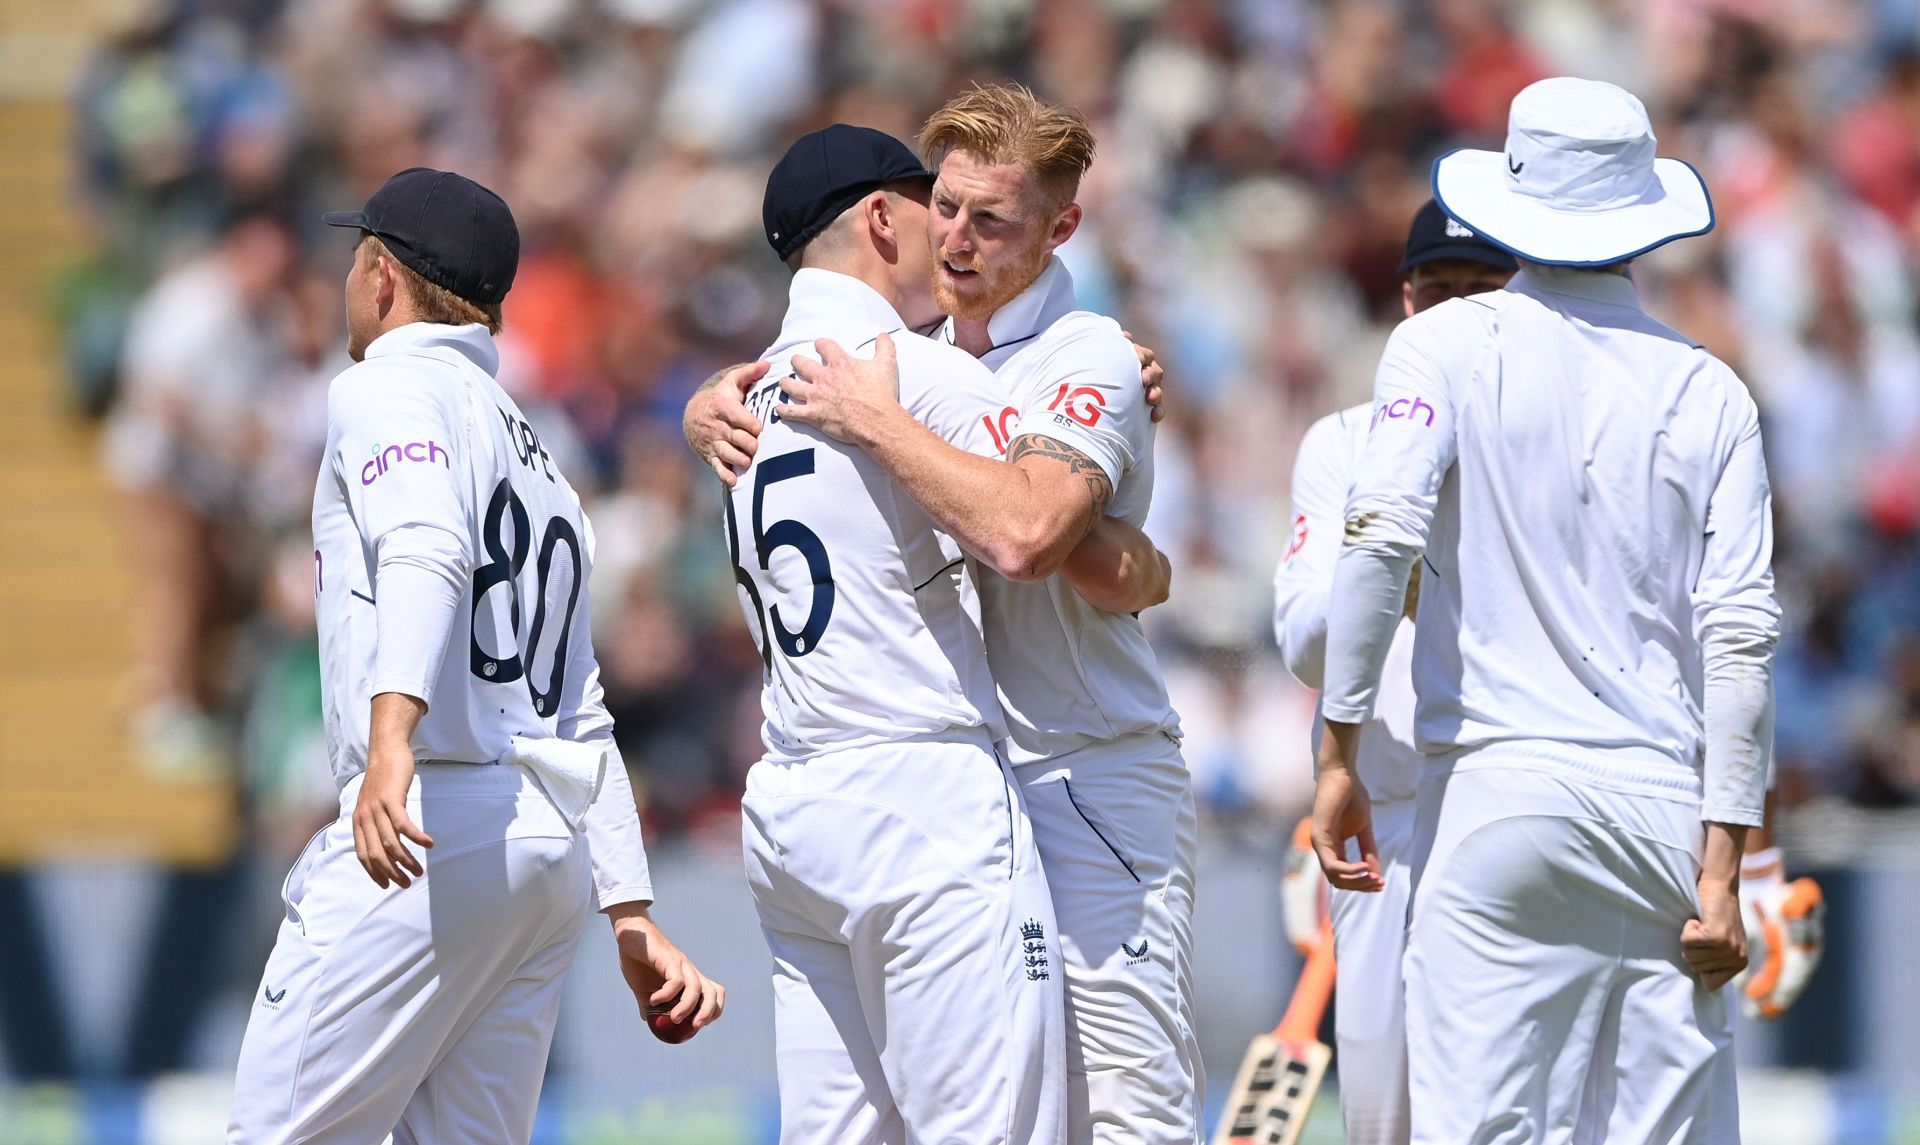 Ben Stokes is congratulated by Matthew Potts after taking the wicket of Ravindra Jadeja. Pic: Getty Images